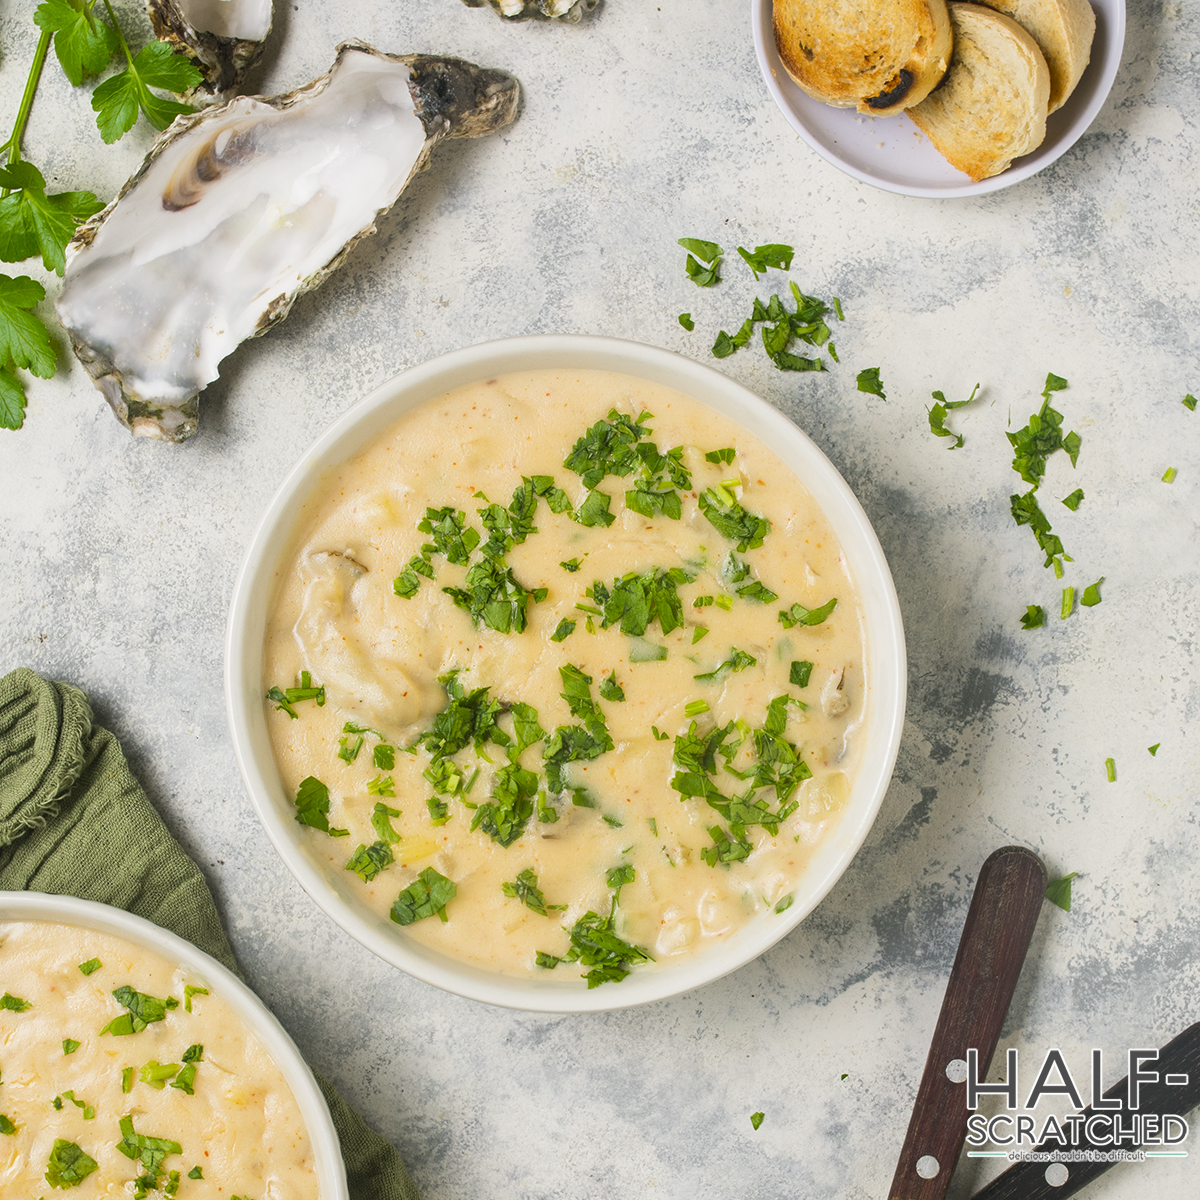 Top view of oyster stew with parsley and bread